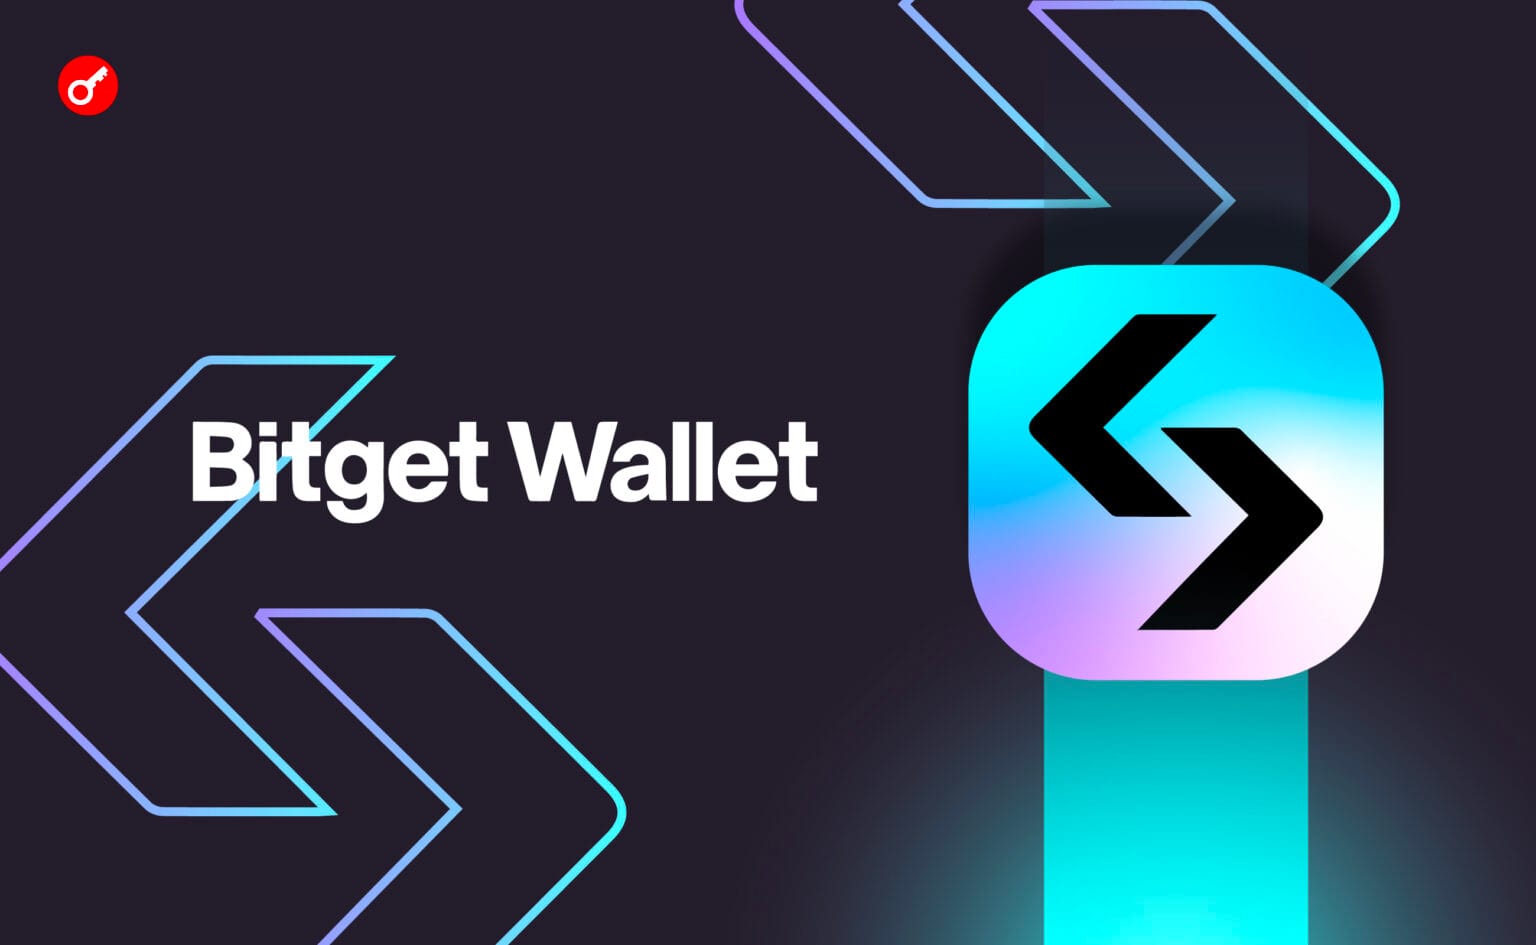 Bitget Wallet announced the launch of the BWB ecosystem token and the airdrop